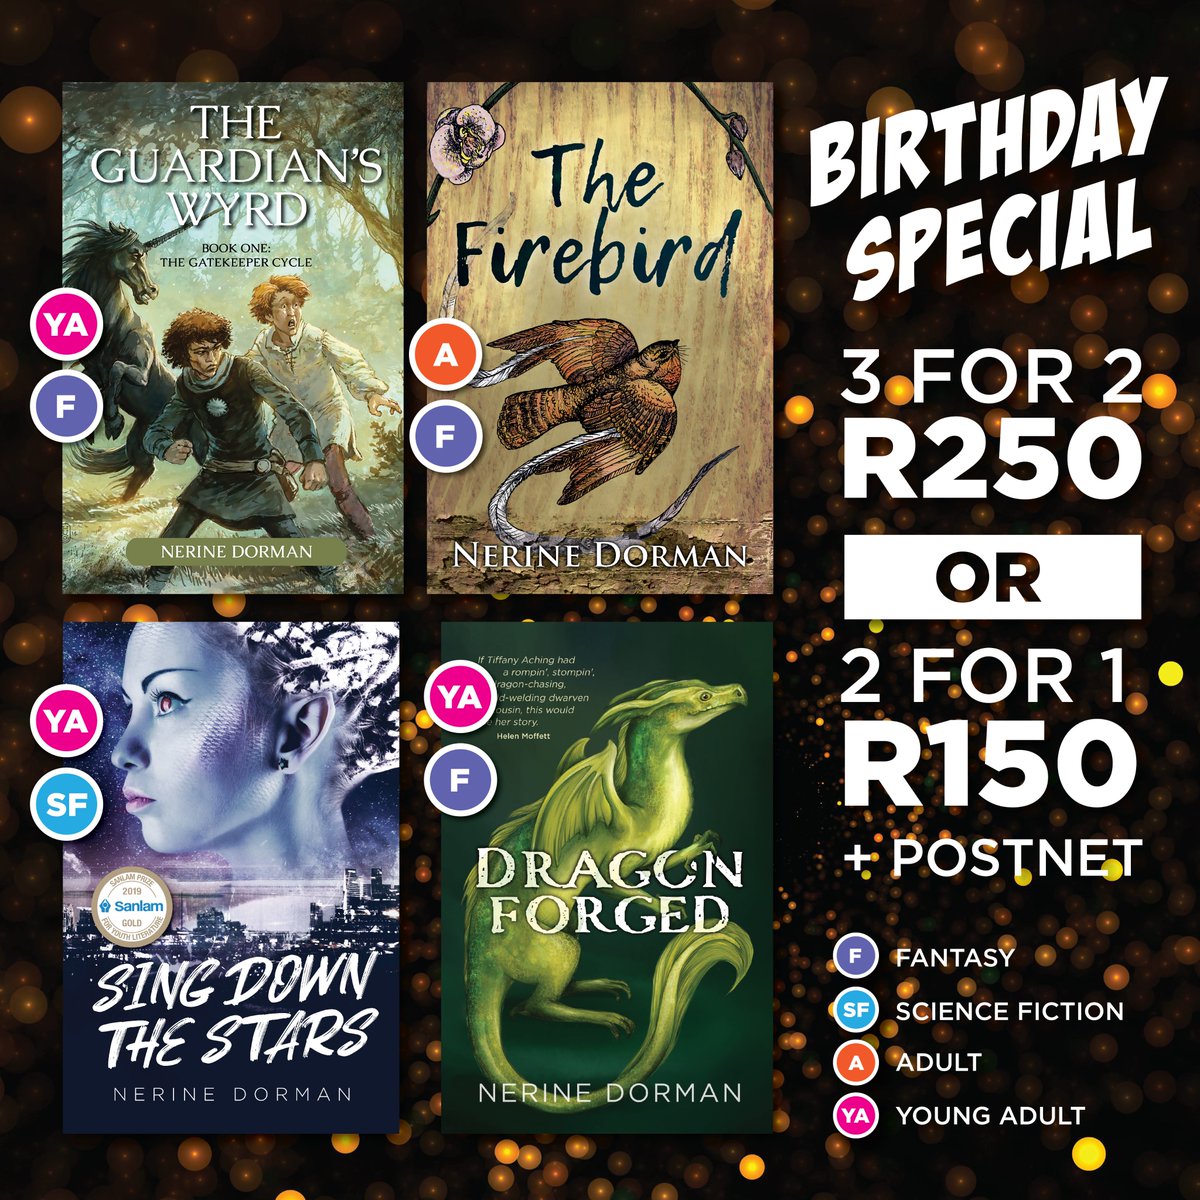 It's my birthday at the end of the month, so I'm running a special on my print copies, exclusive to South Africans. Get 3 for the price of 2 at R250 or 2 for the price of 1 at R150 + the cost of PostNet. Email nerinedorman@gmail.com to place your order.